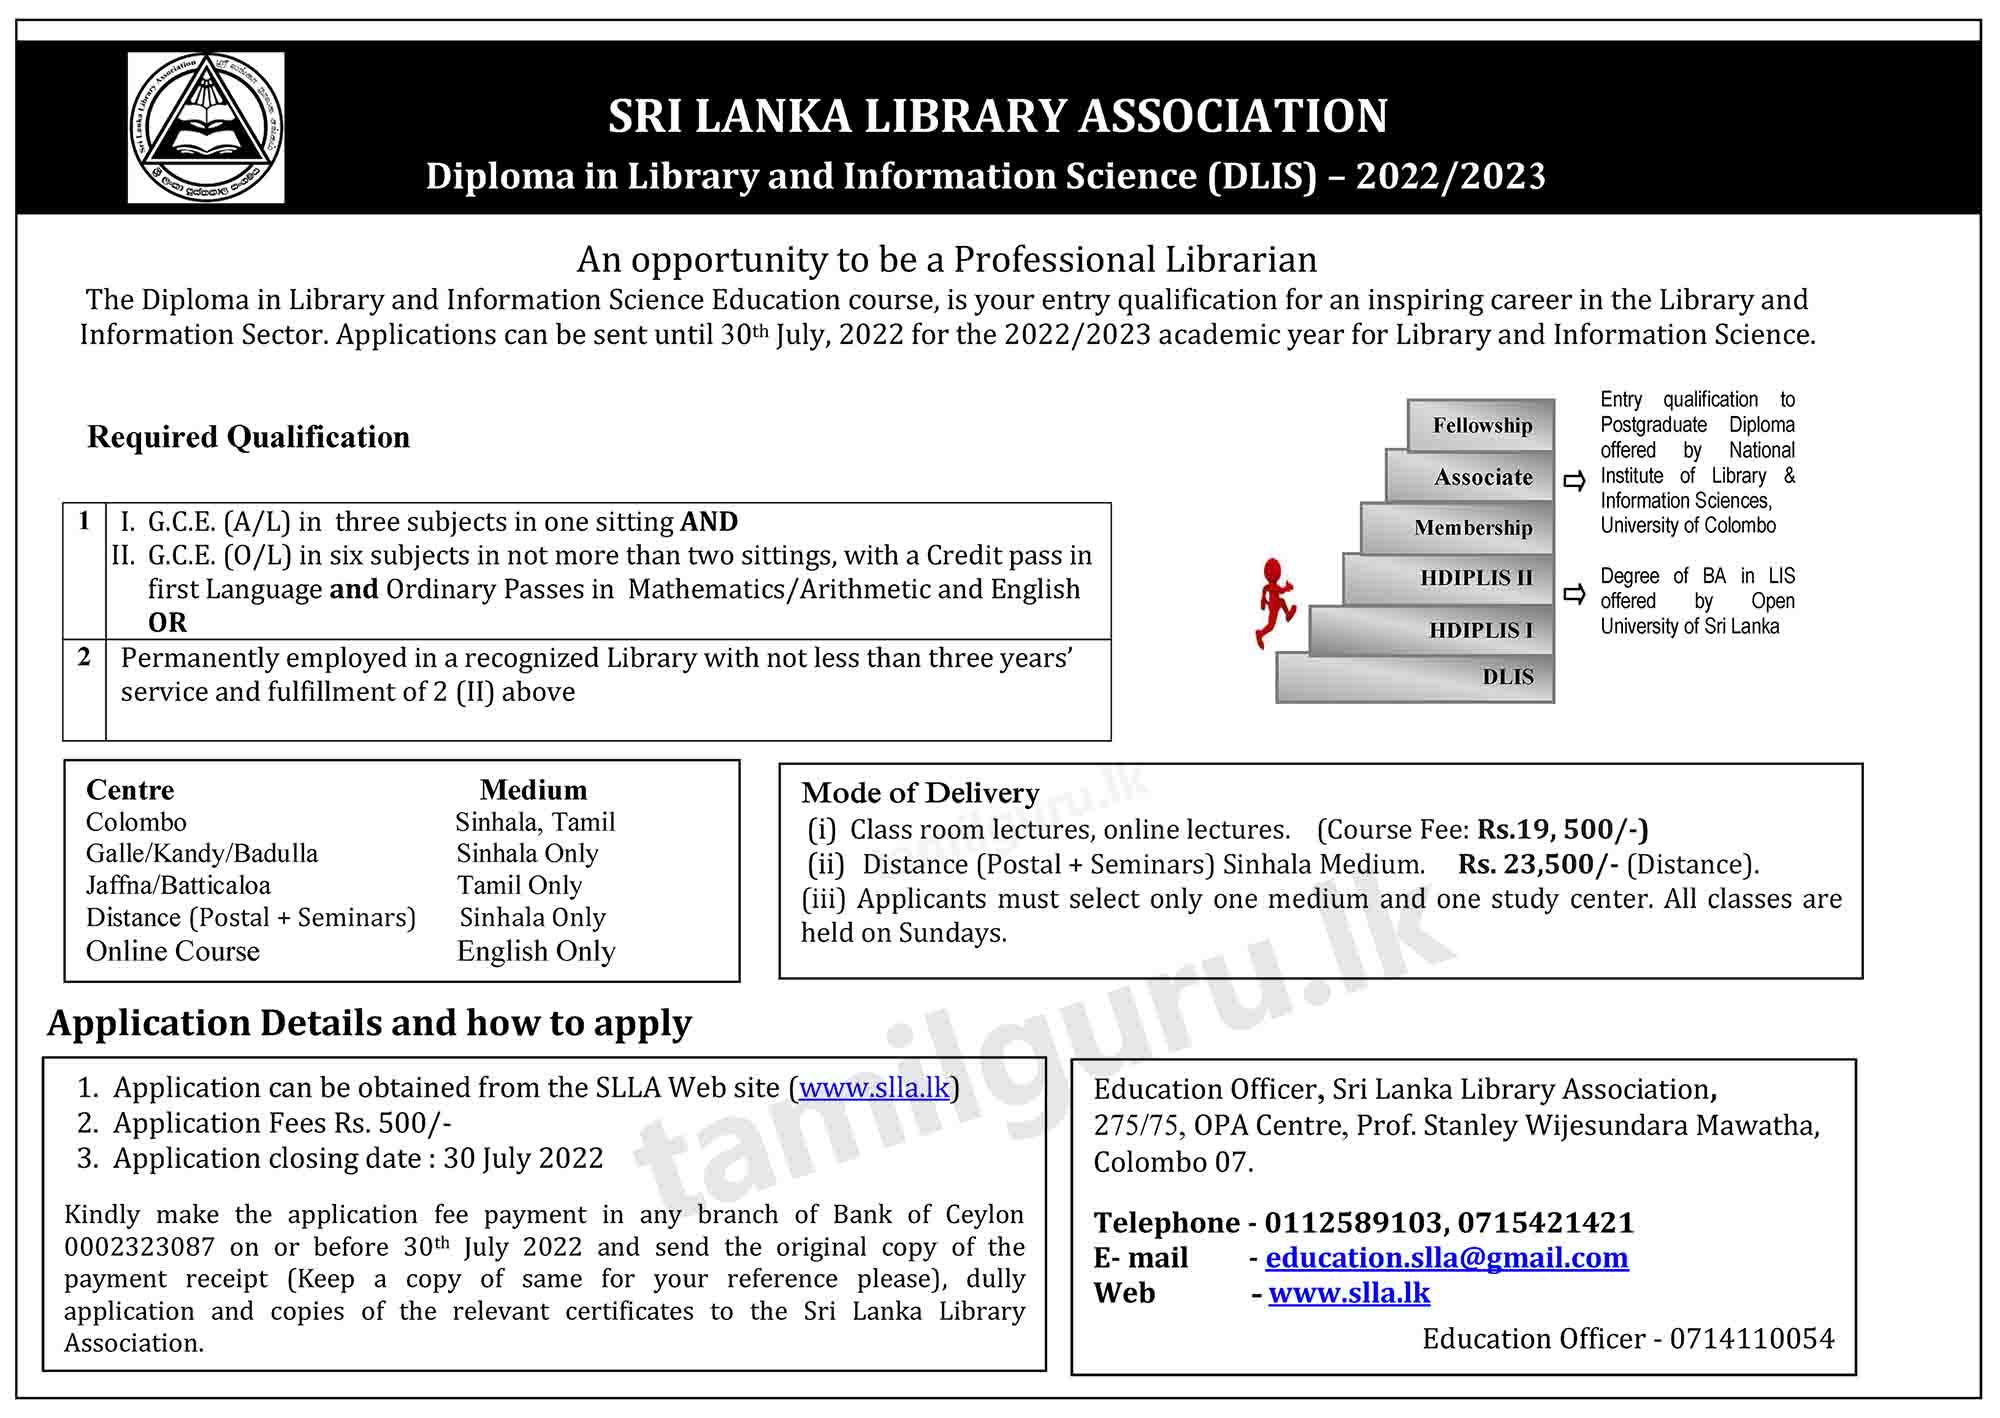 Diploma in Library and Information Science (DLIS) Course 2022/2023 - Sri Lanka Library Association